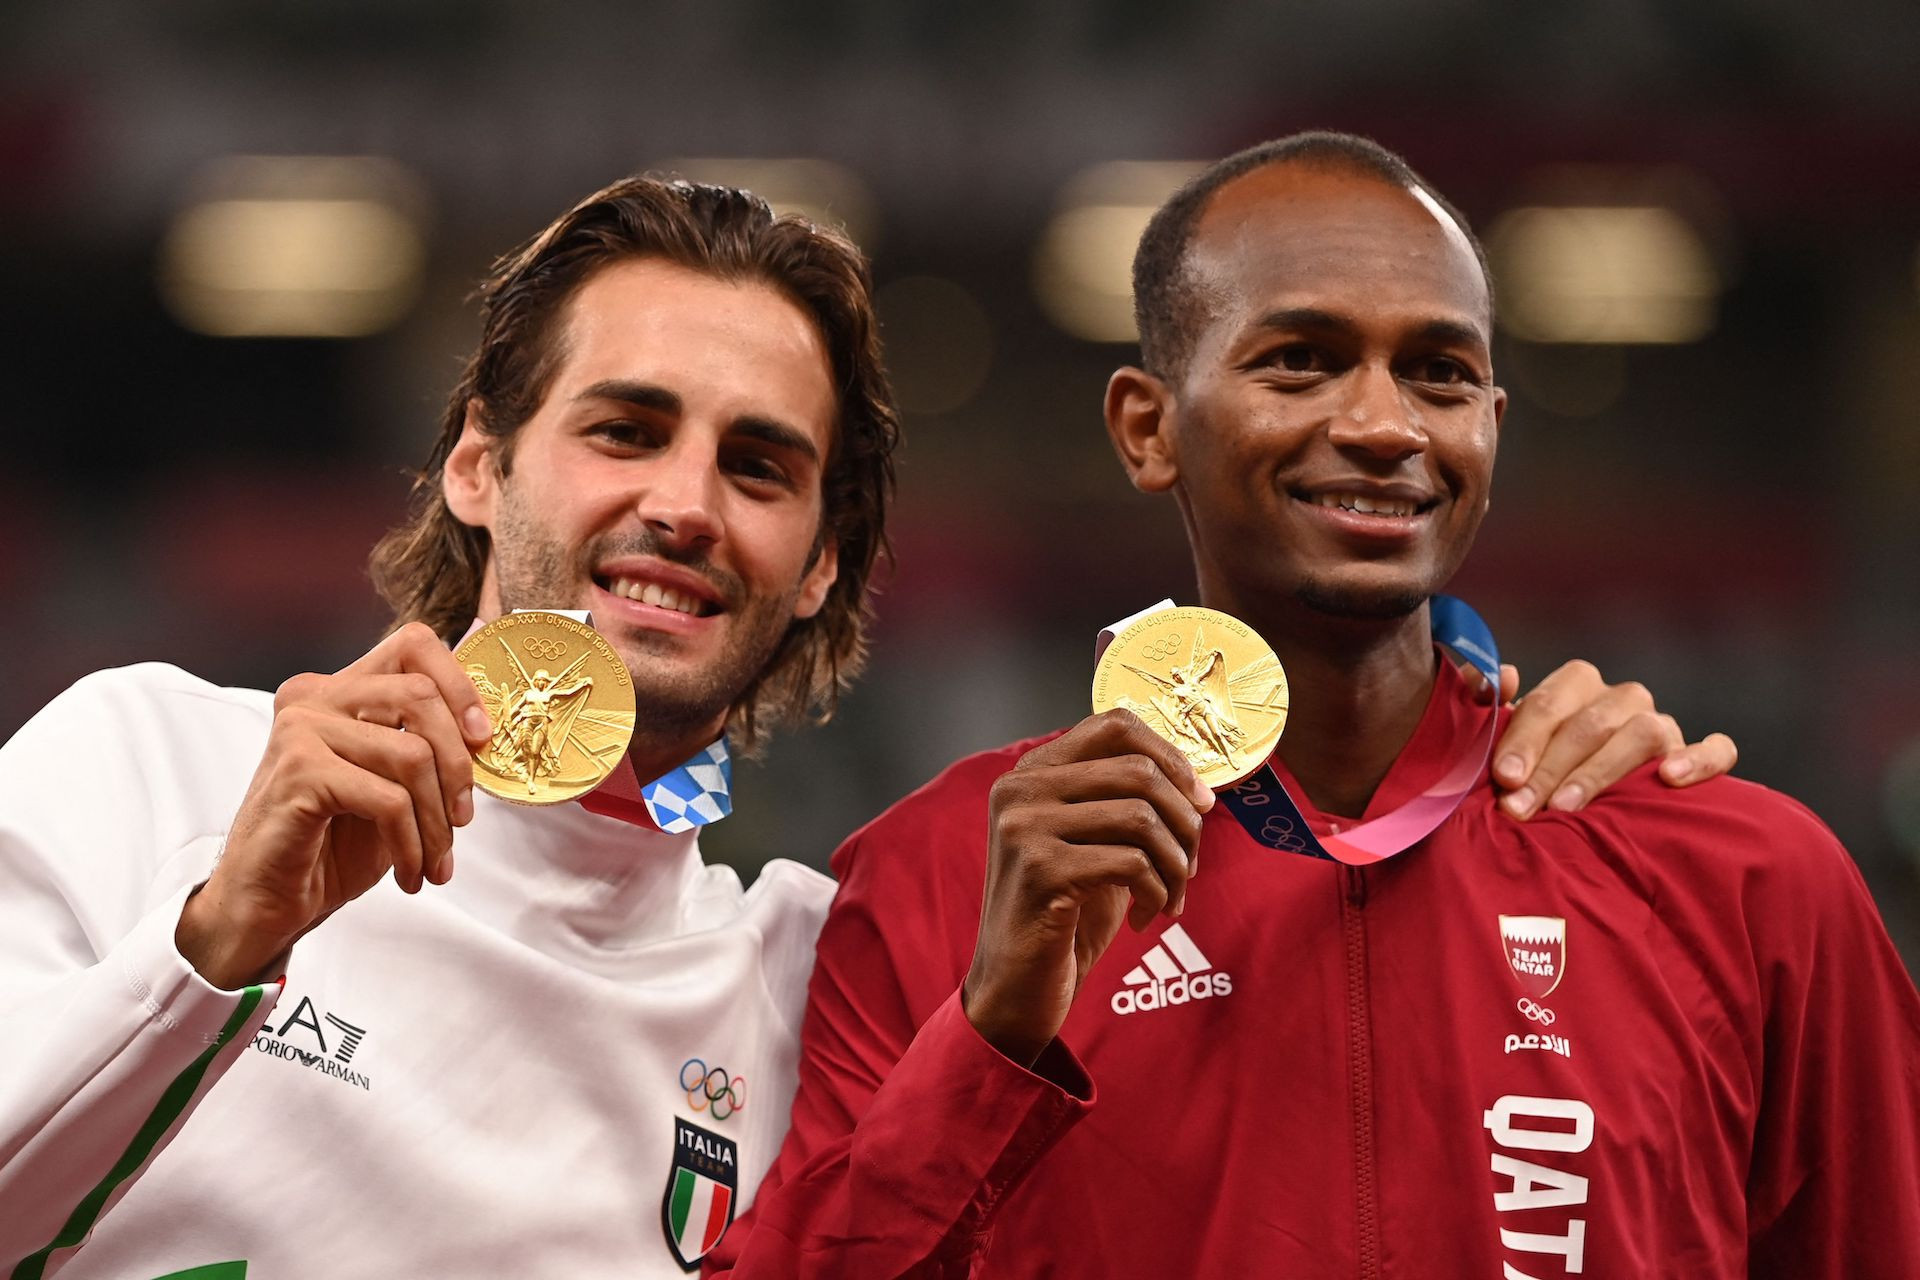 Qatar's Barshim (R) and Italy's Tamberi shared gold in the high jump at Tokyo 2020. GETTY IMAGES